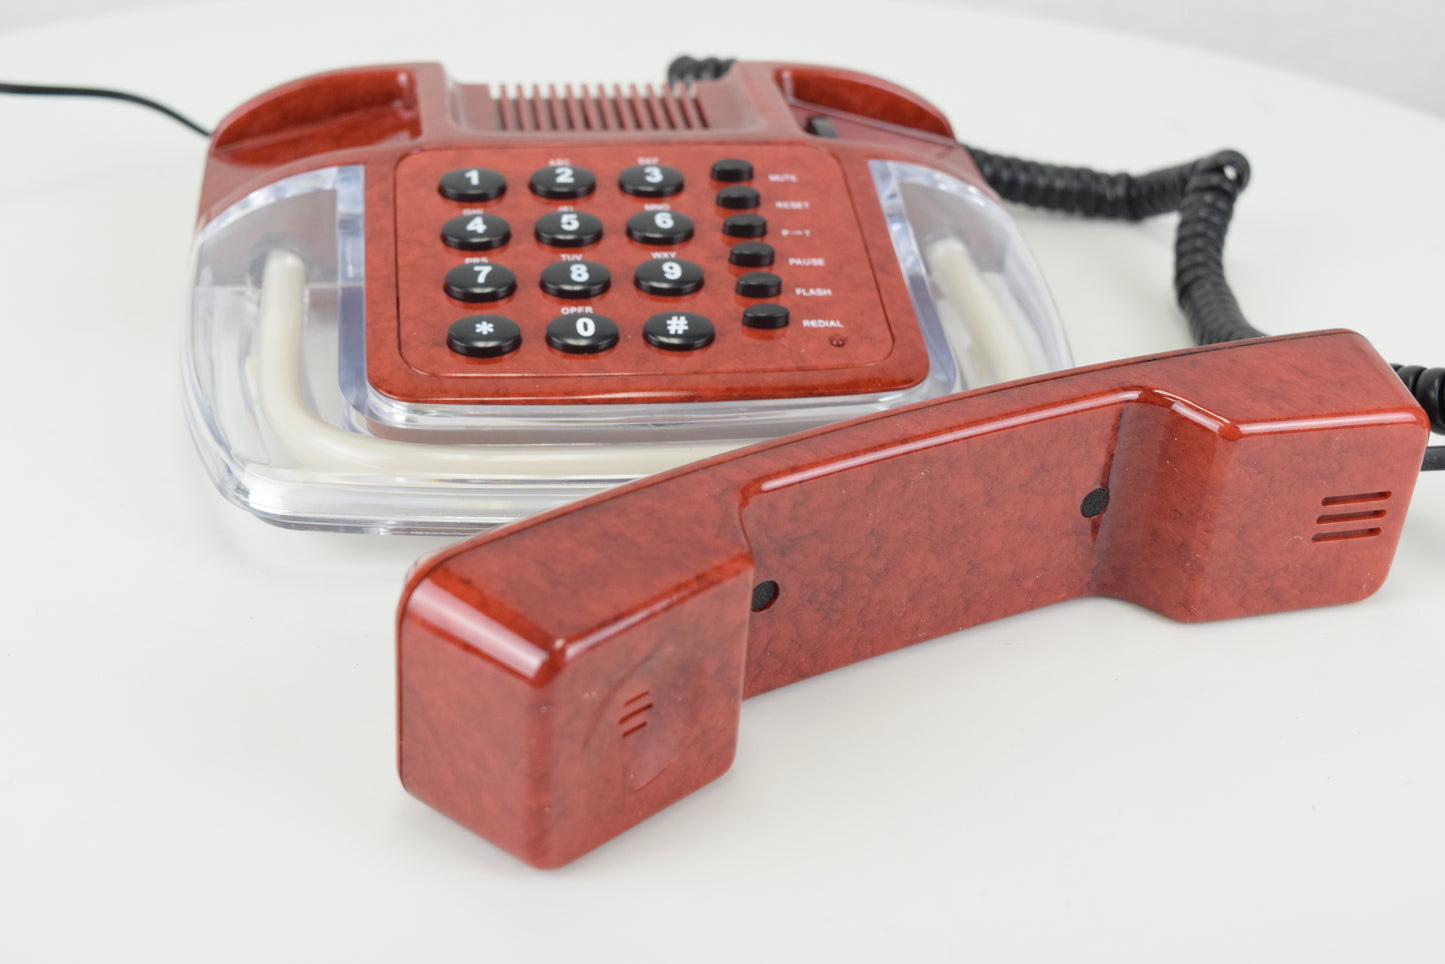 Neon Glow Telephone - Red/Clear with Pink Light